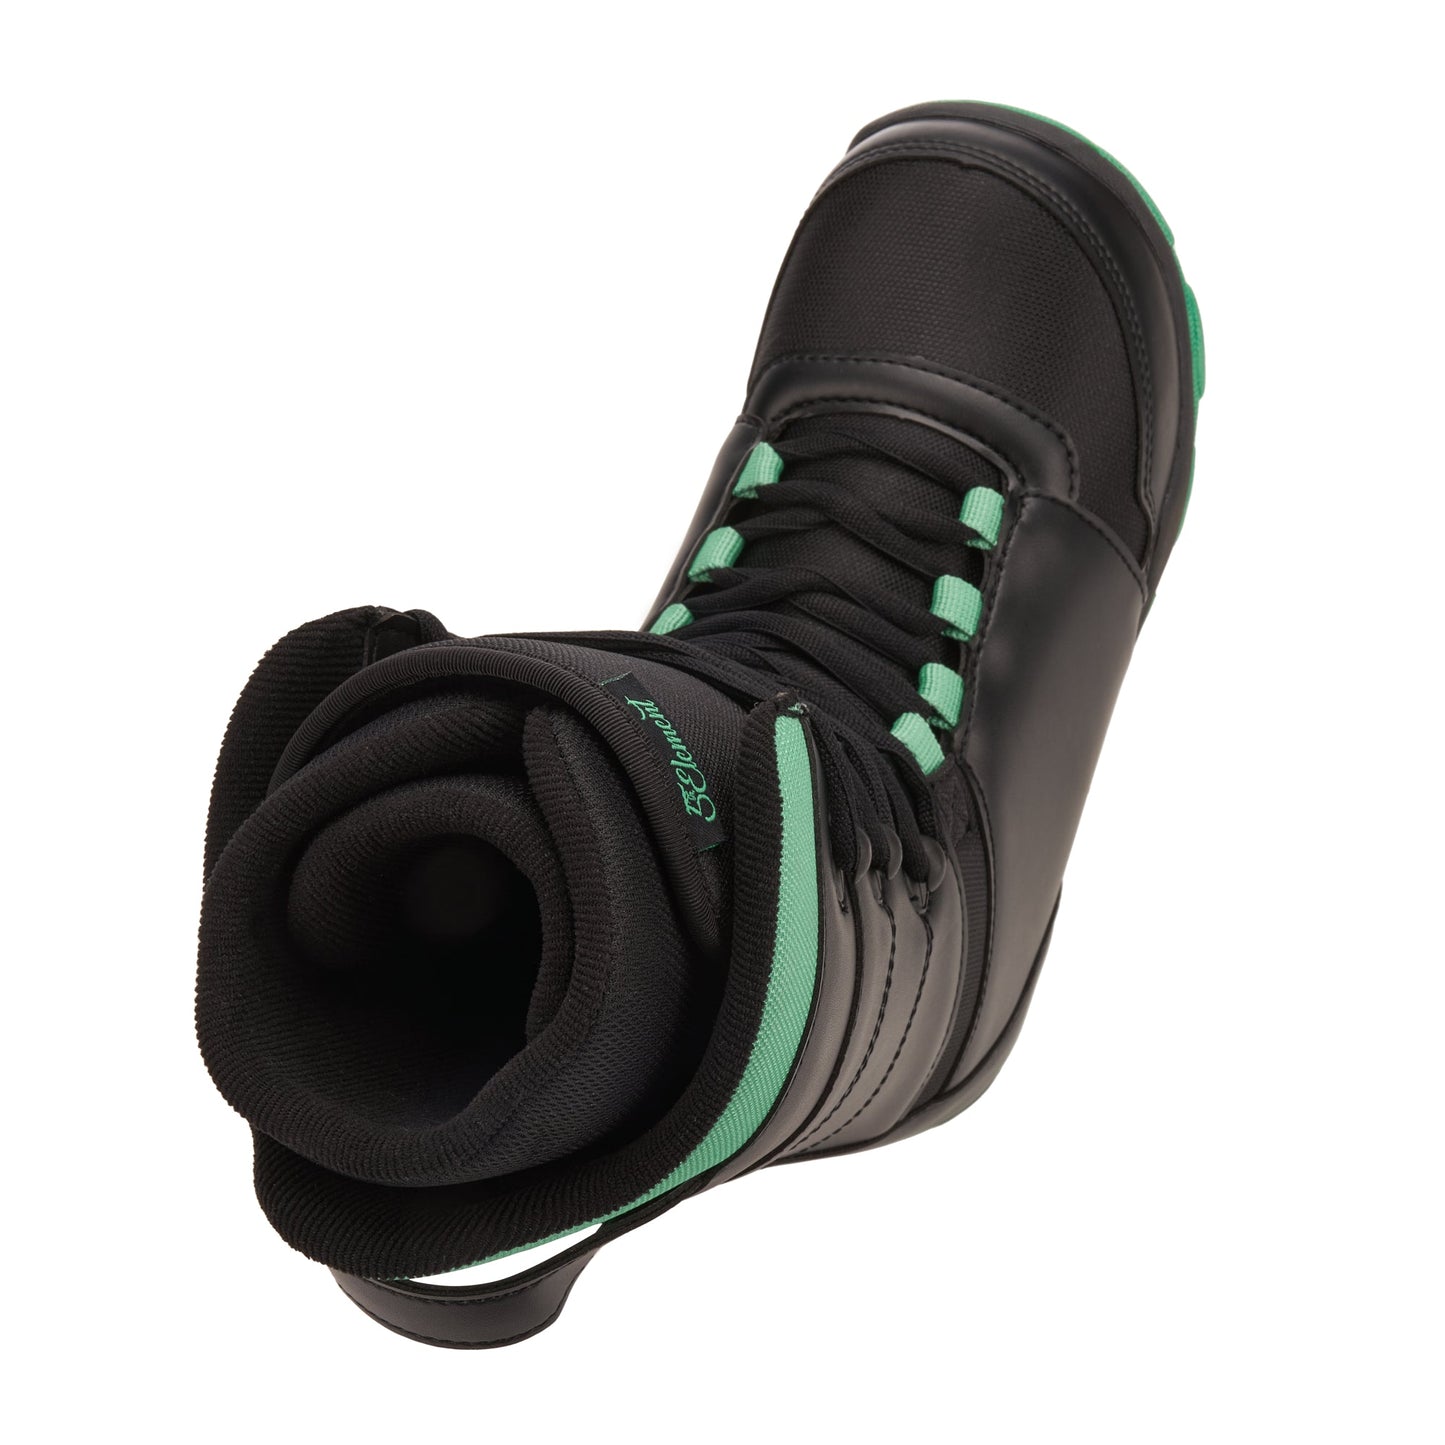 5th Element Afterglow Complete Snowboard Package - Black/Teal Black